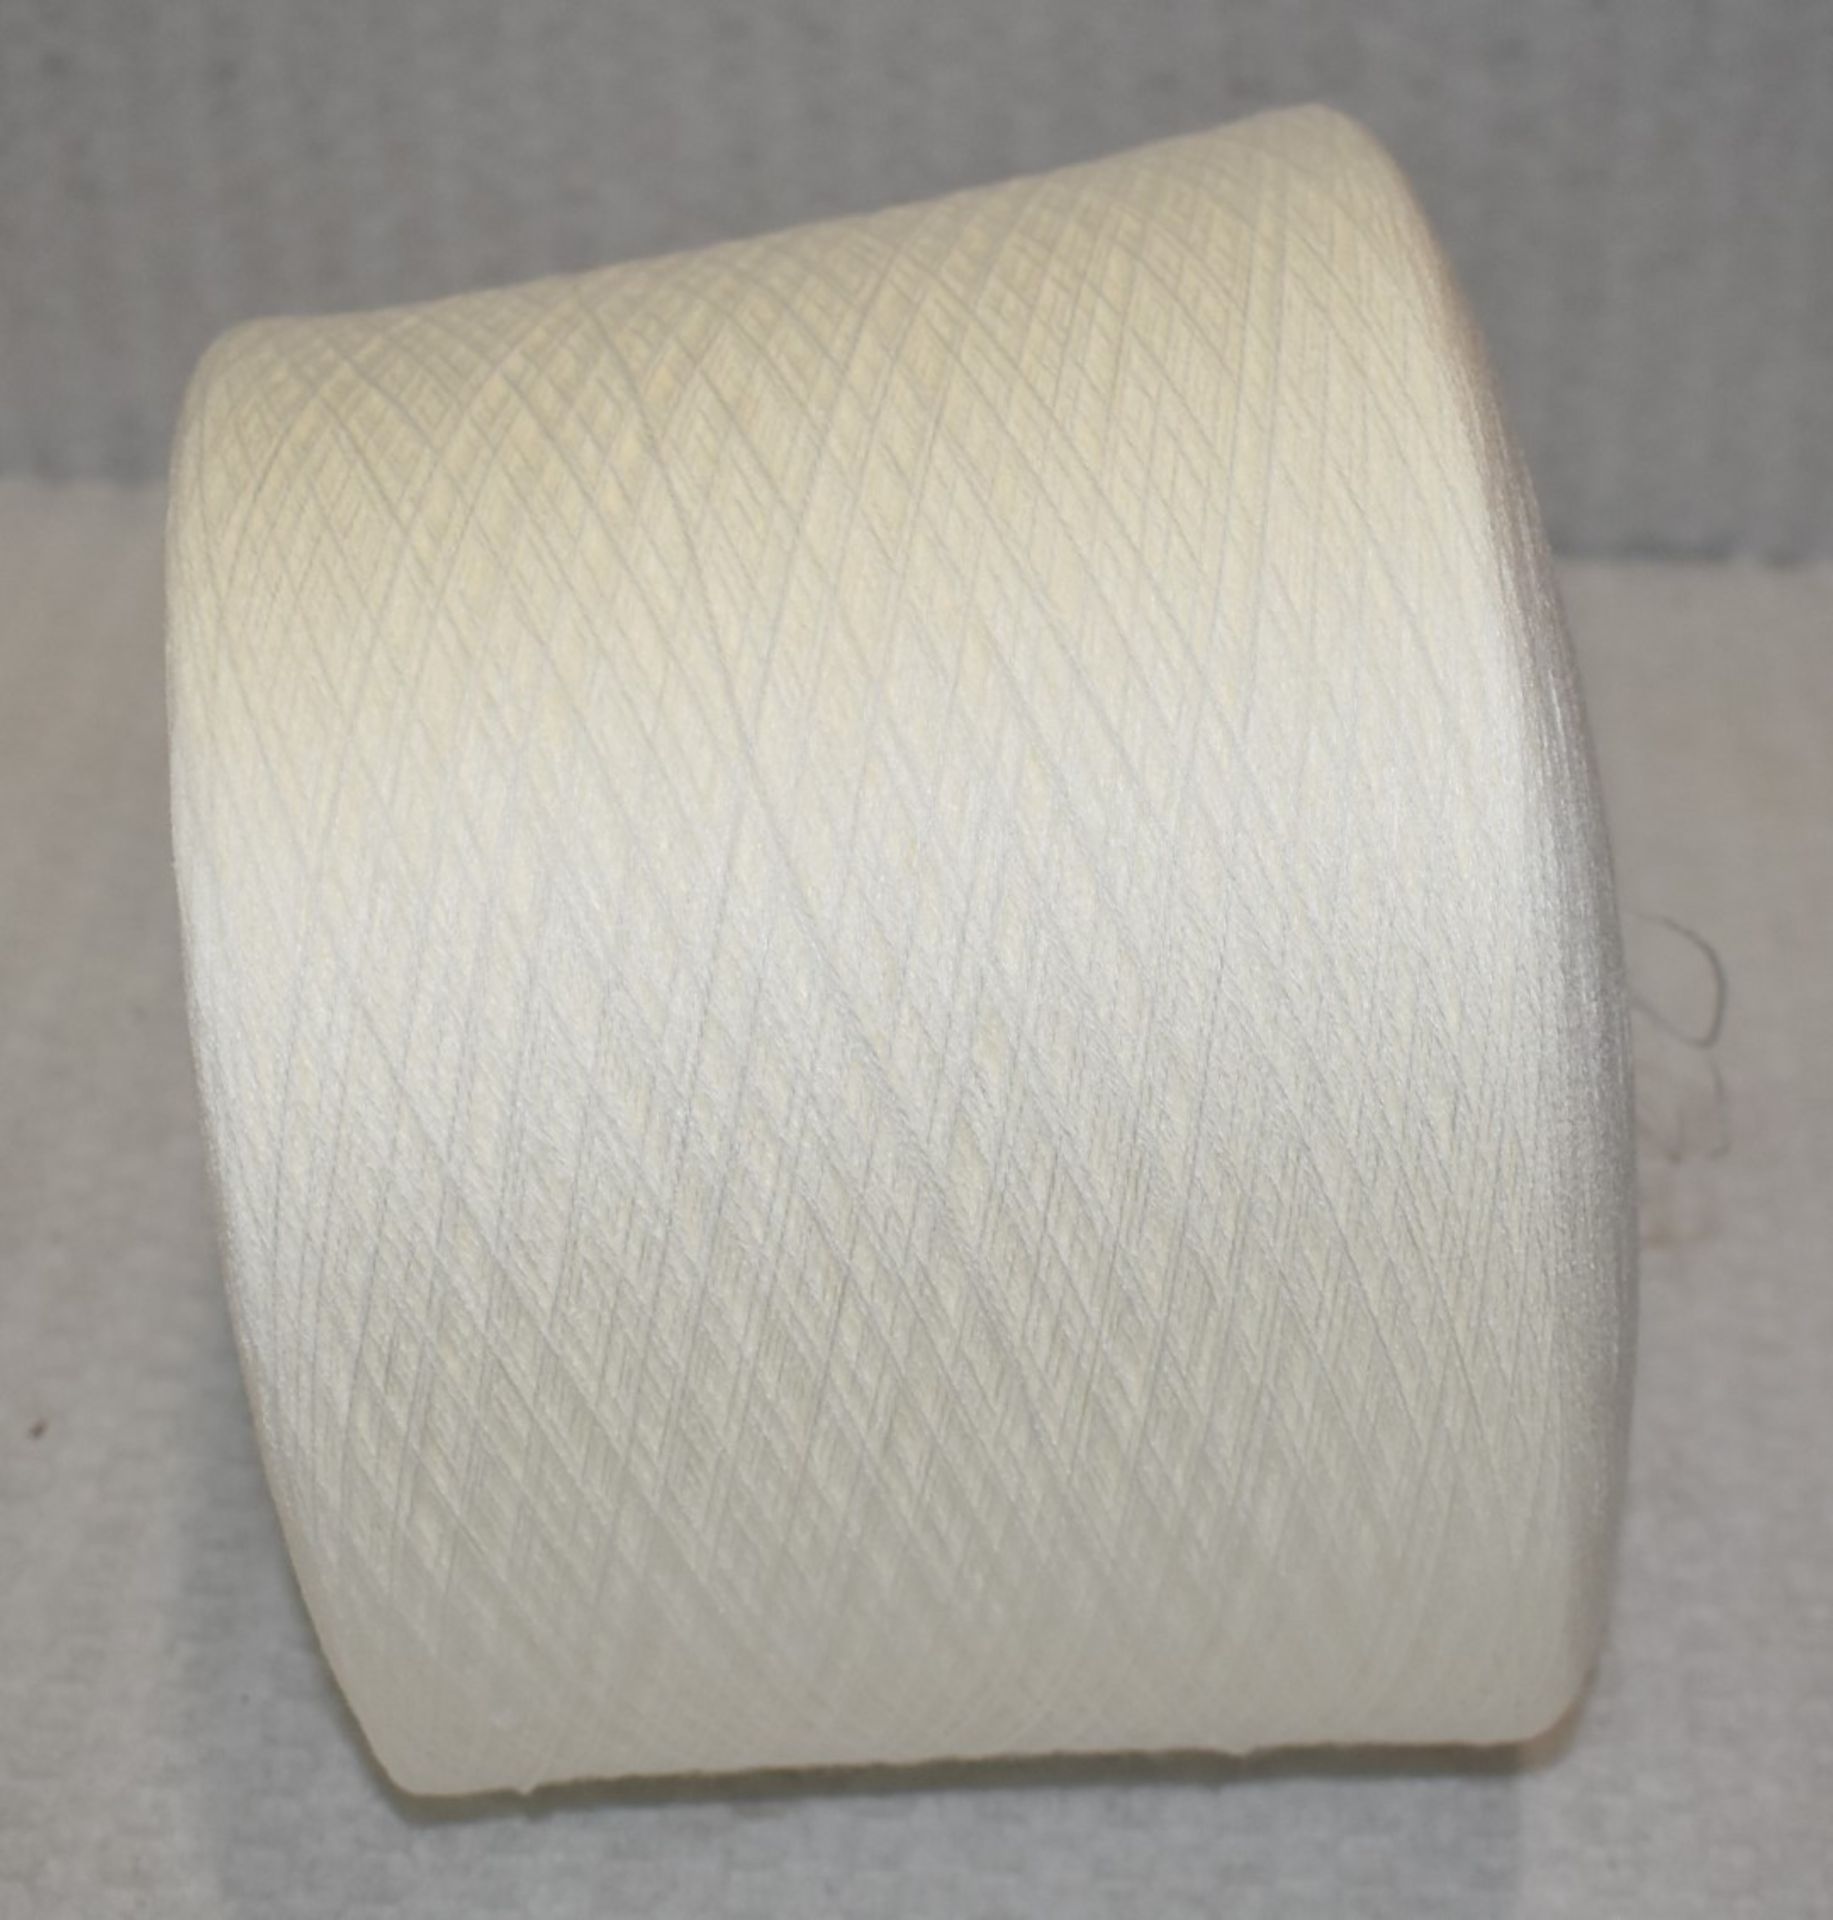 6 x Cones of 28/2 H.B 100% Acrylic Knitting Yarn - Colour: Ivory - Approx Weight: 1,300g - New Stock - Image 10 of 10